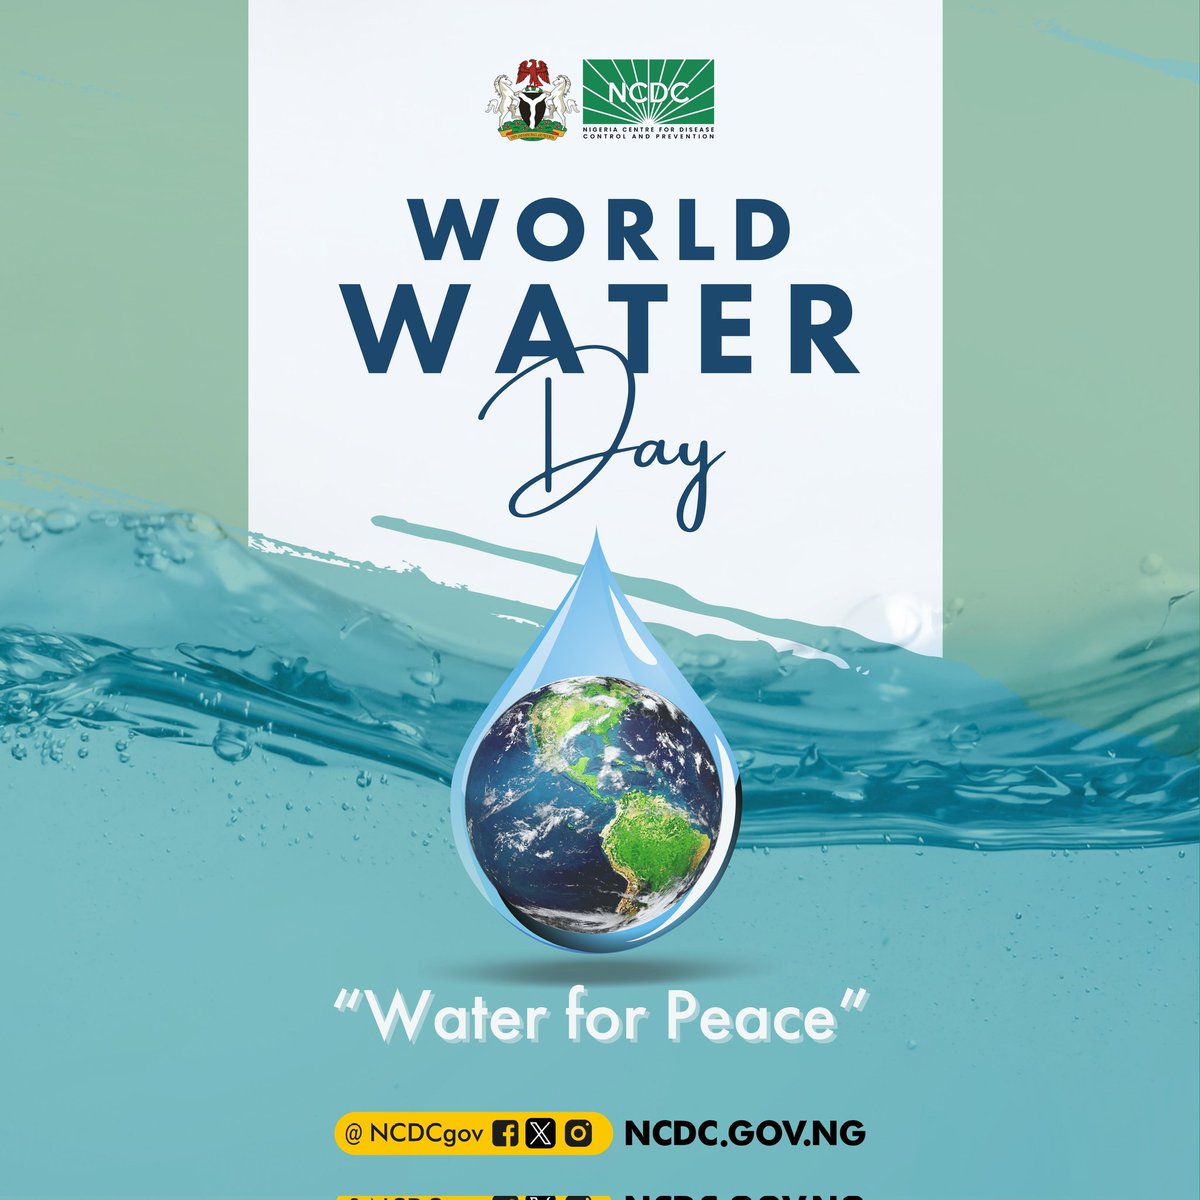 Access to safe water is a fundamental human right, not a privilege. Today, on #WorldWaterDay, we stand with the global community to highlight the vital importance of safe water💧for healthy and peaceful living. Together, we can create ripples of change and ensure a future where…